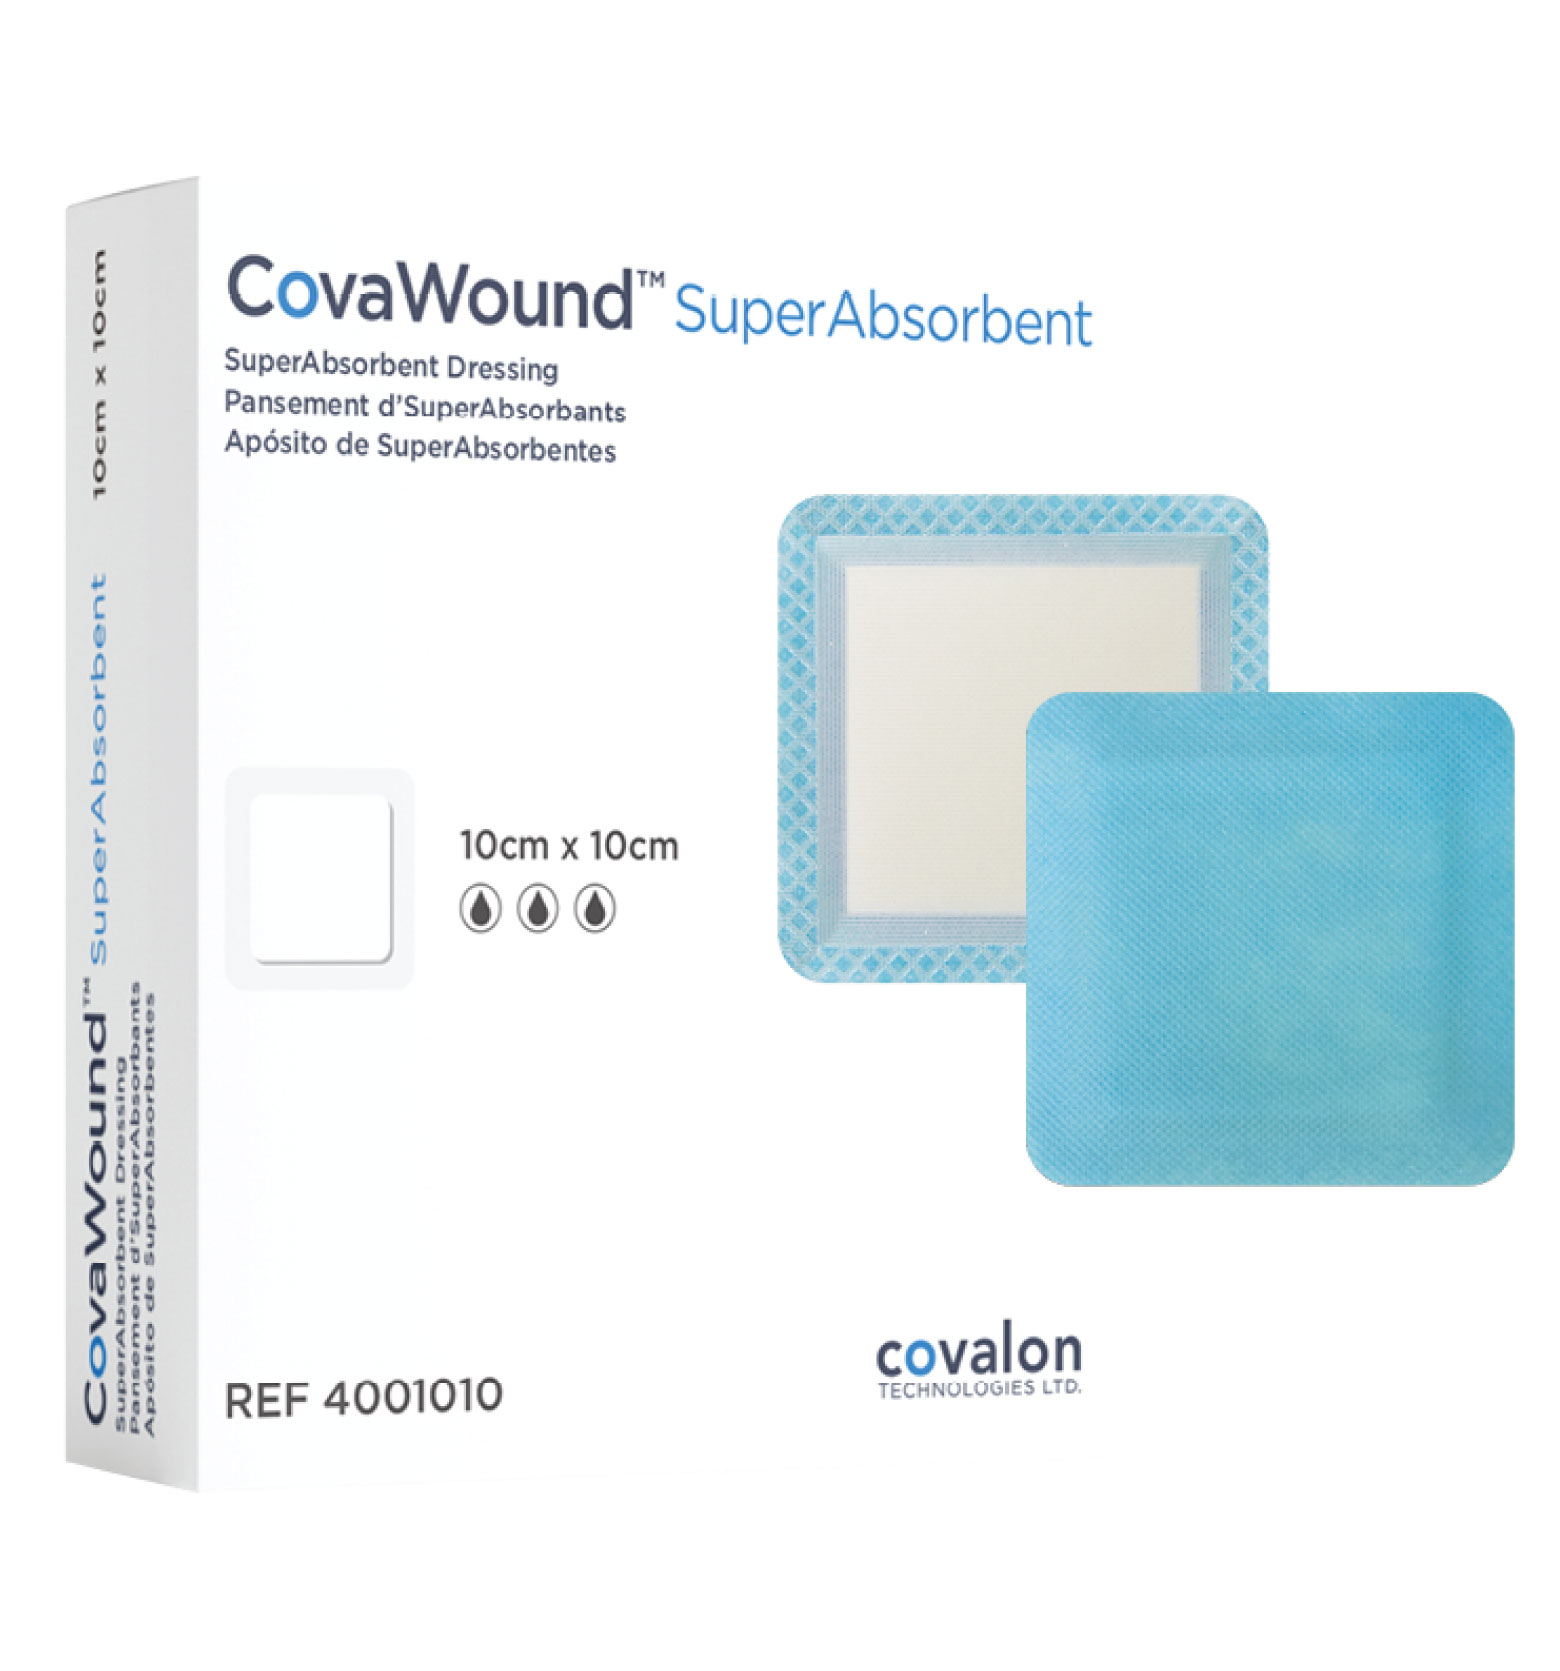 CovaWound SuperAbsorbent